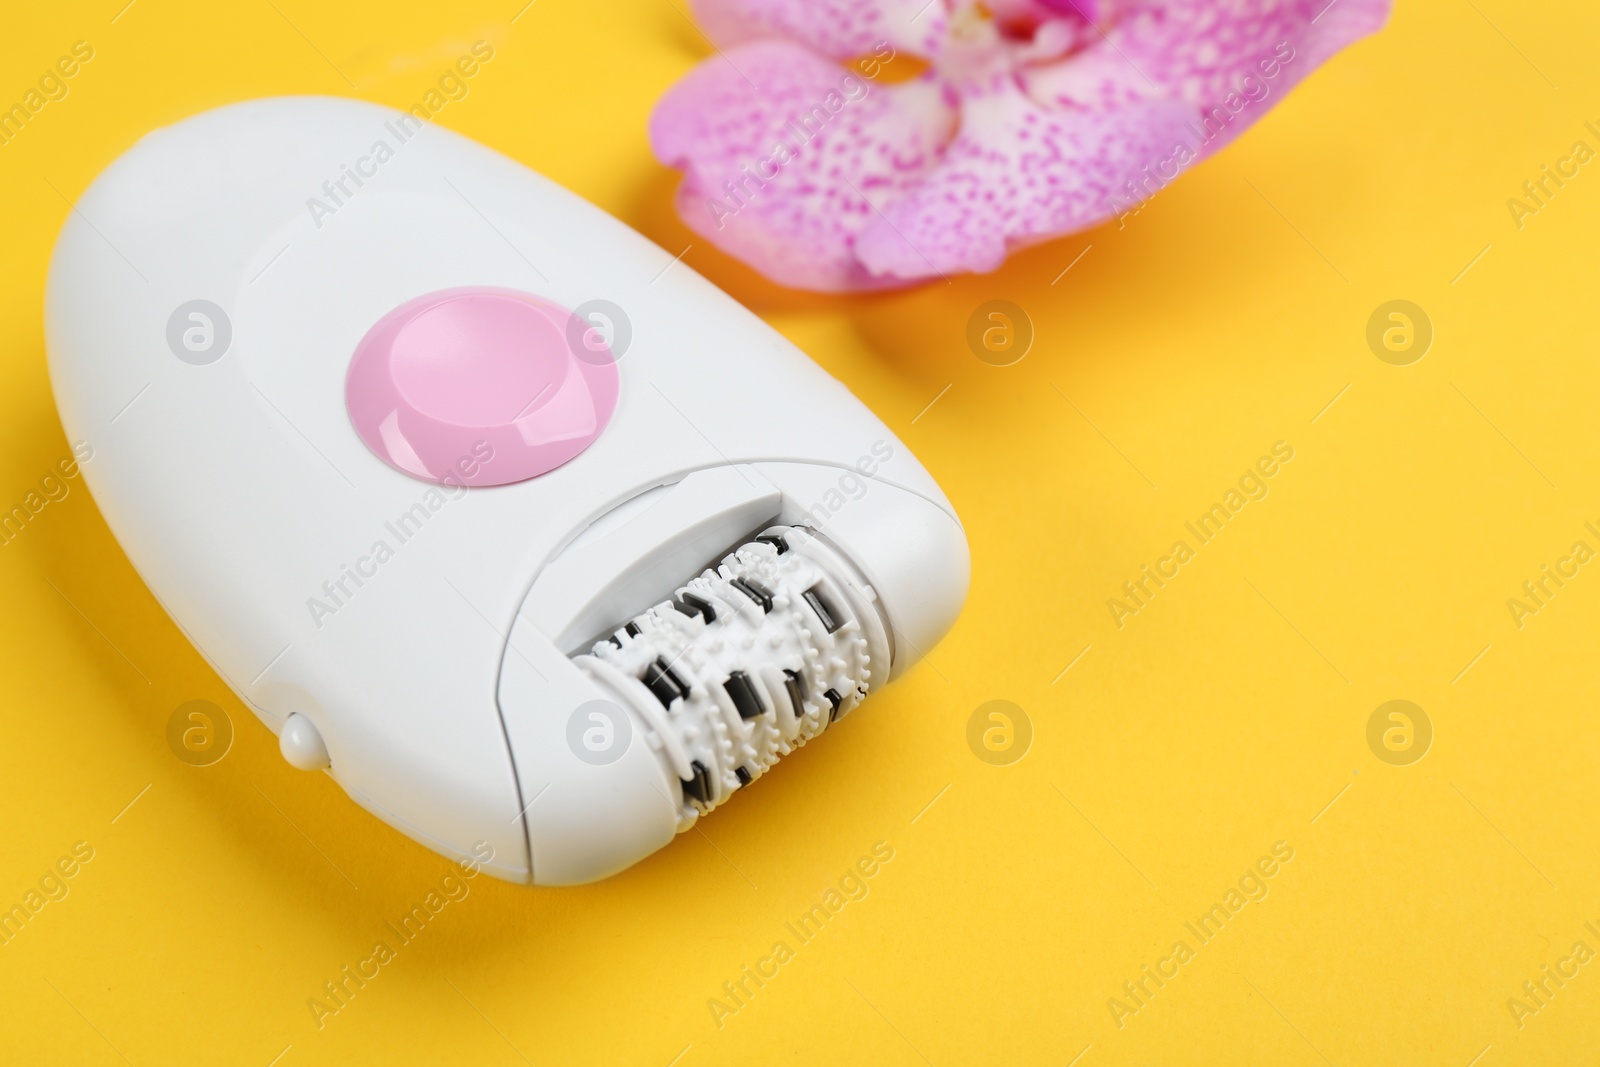 Image of Modern epilator and flower on yellow background